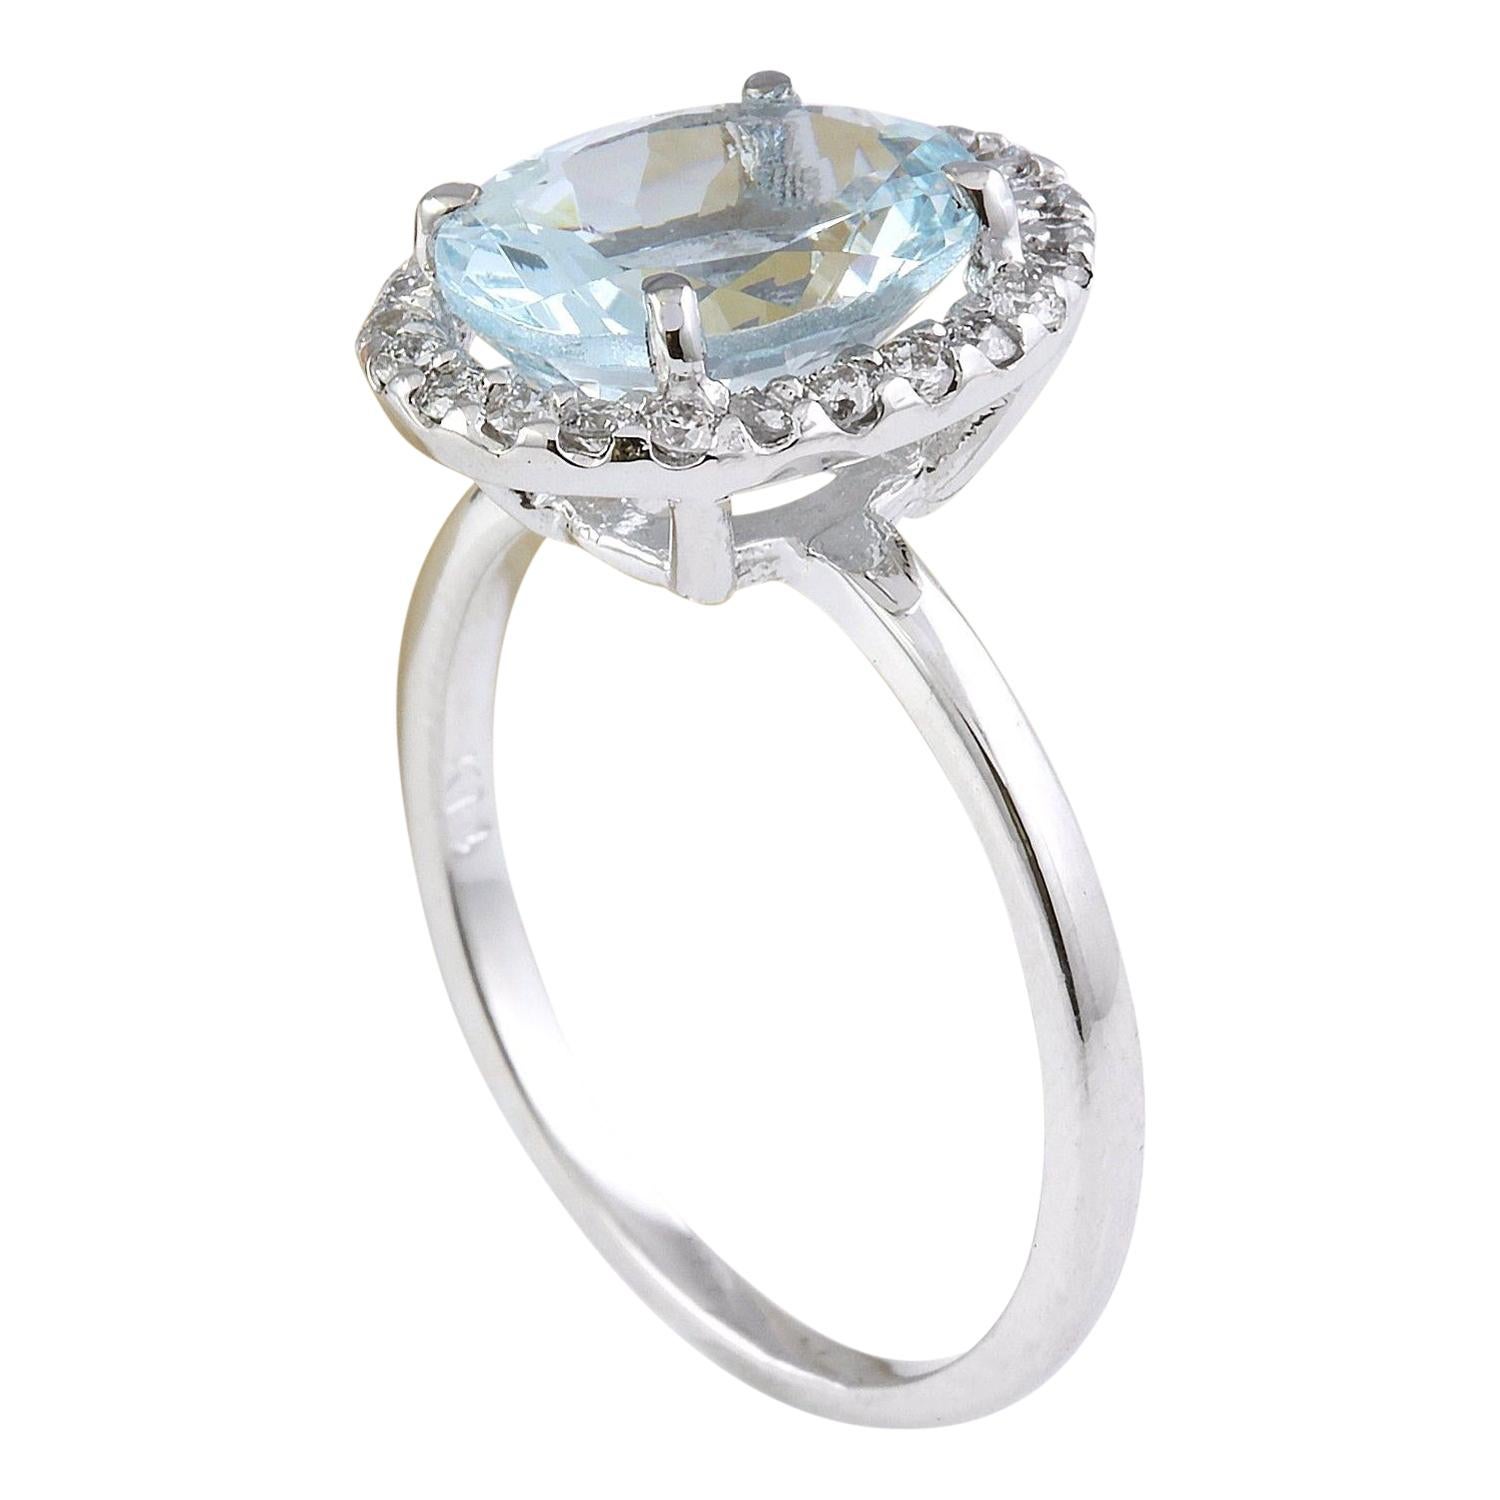 3.55 Carat Natural Aquamarine 14 Karat Solid White Gold Diamond Ring In New Condition For Sale In Los Angeles, CA